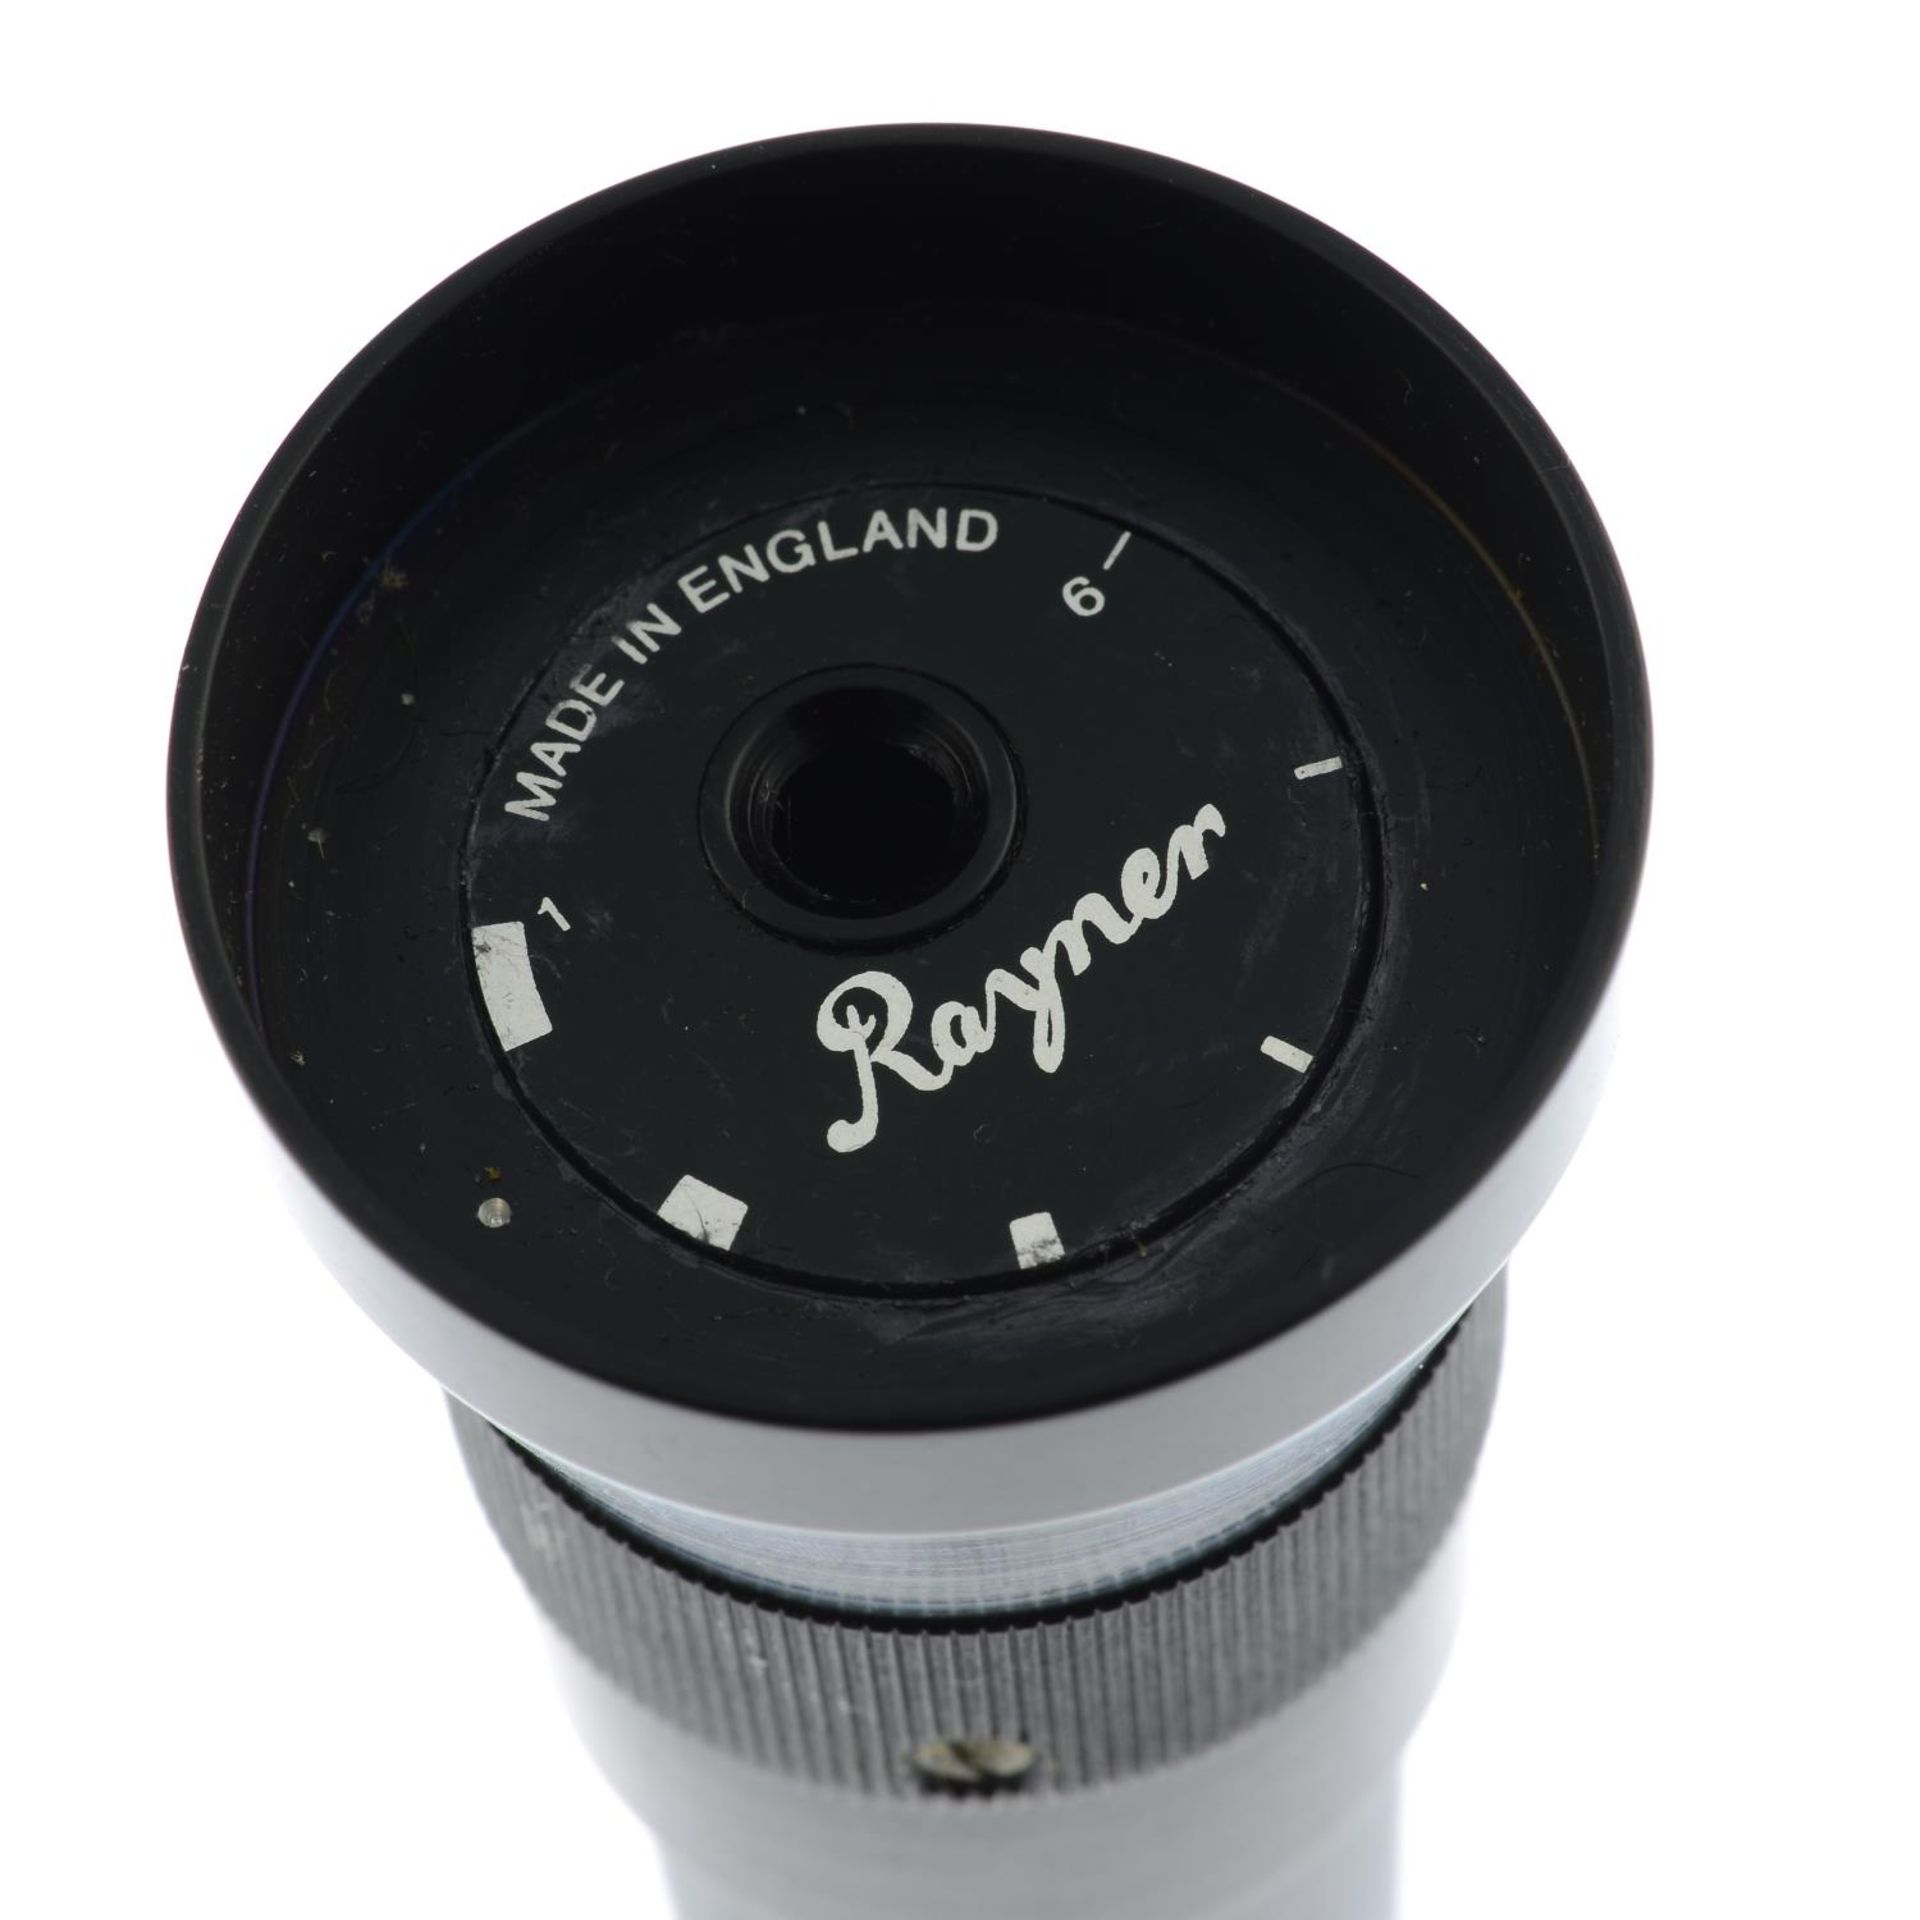 A Rayner refractometer and spectroscope, with stand. - Image 5 of 7